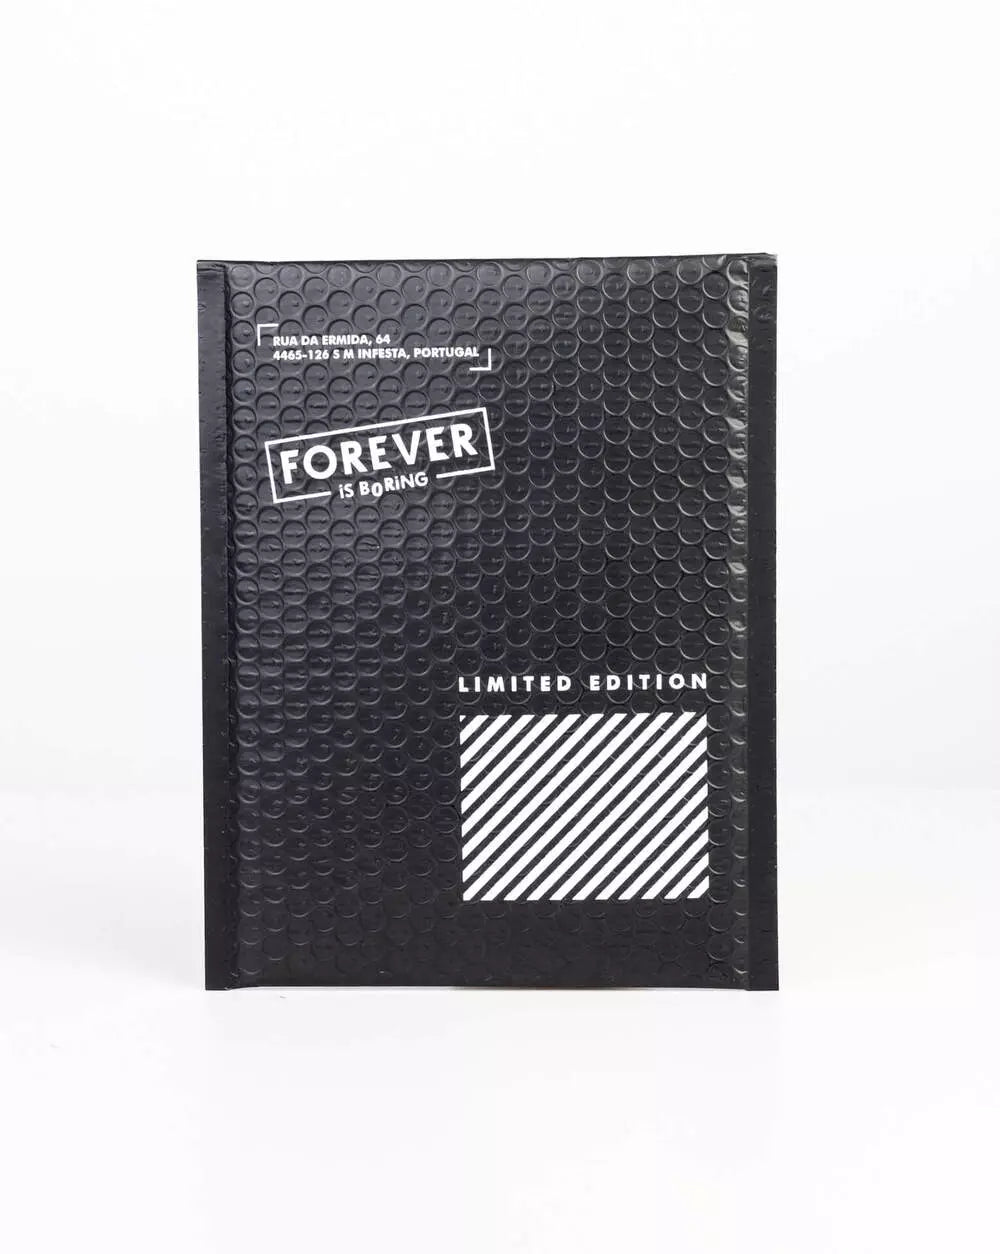 Forever Is Boring gift bag size s. Black with inscriptions in white. 